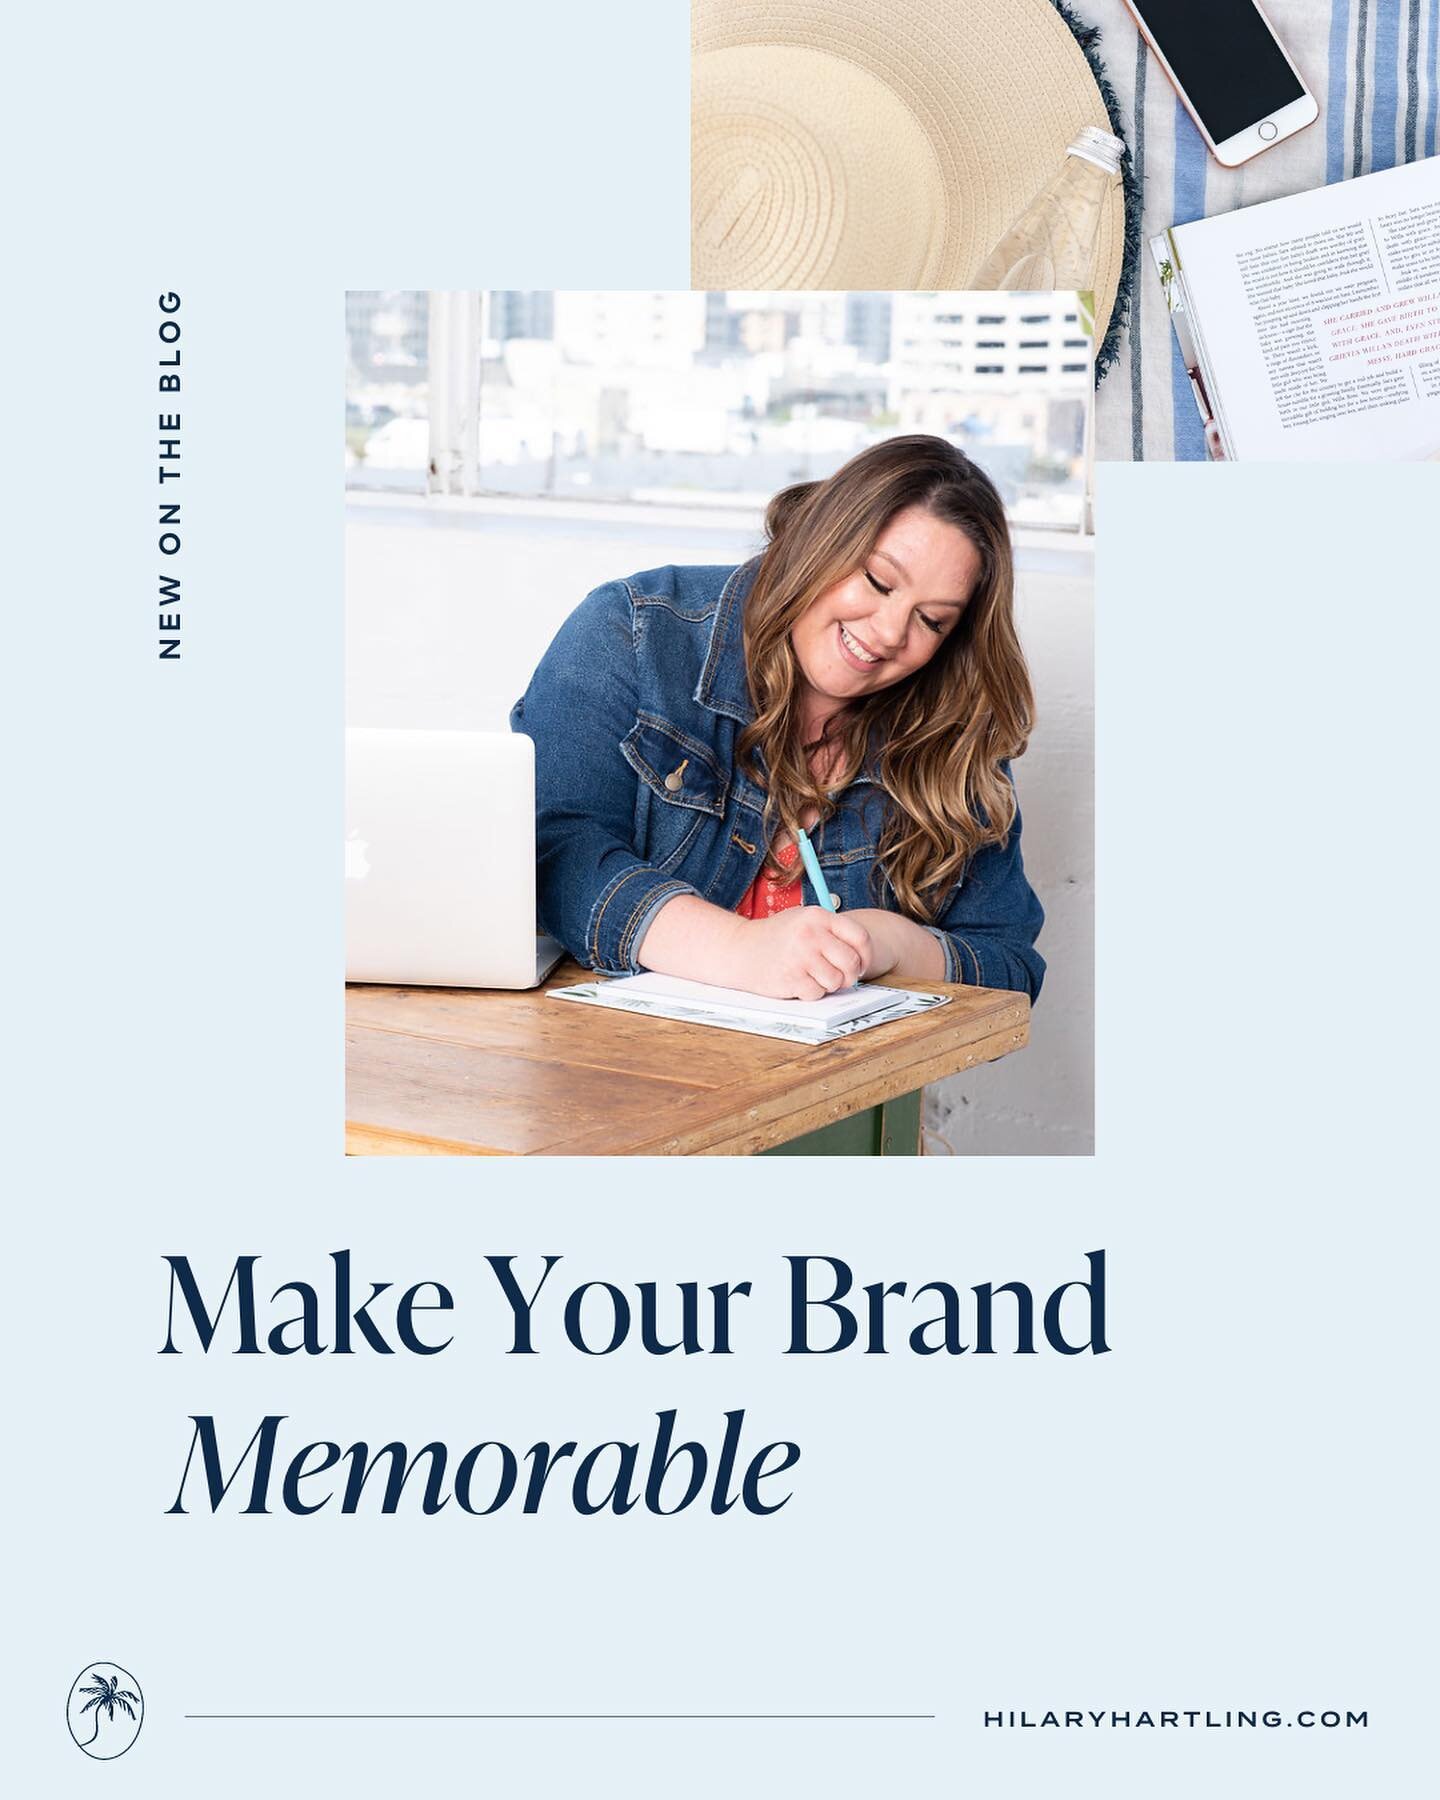 Add THIS to make your brand memorable 🎉

If you&rsquo;re working to intentionally build a brand, one of your primary goals is to make it memorable. 

You want your target audience to: 
remember your brand, and&hellip;
think of your brand as the go-t